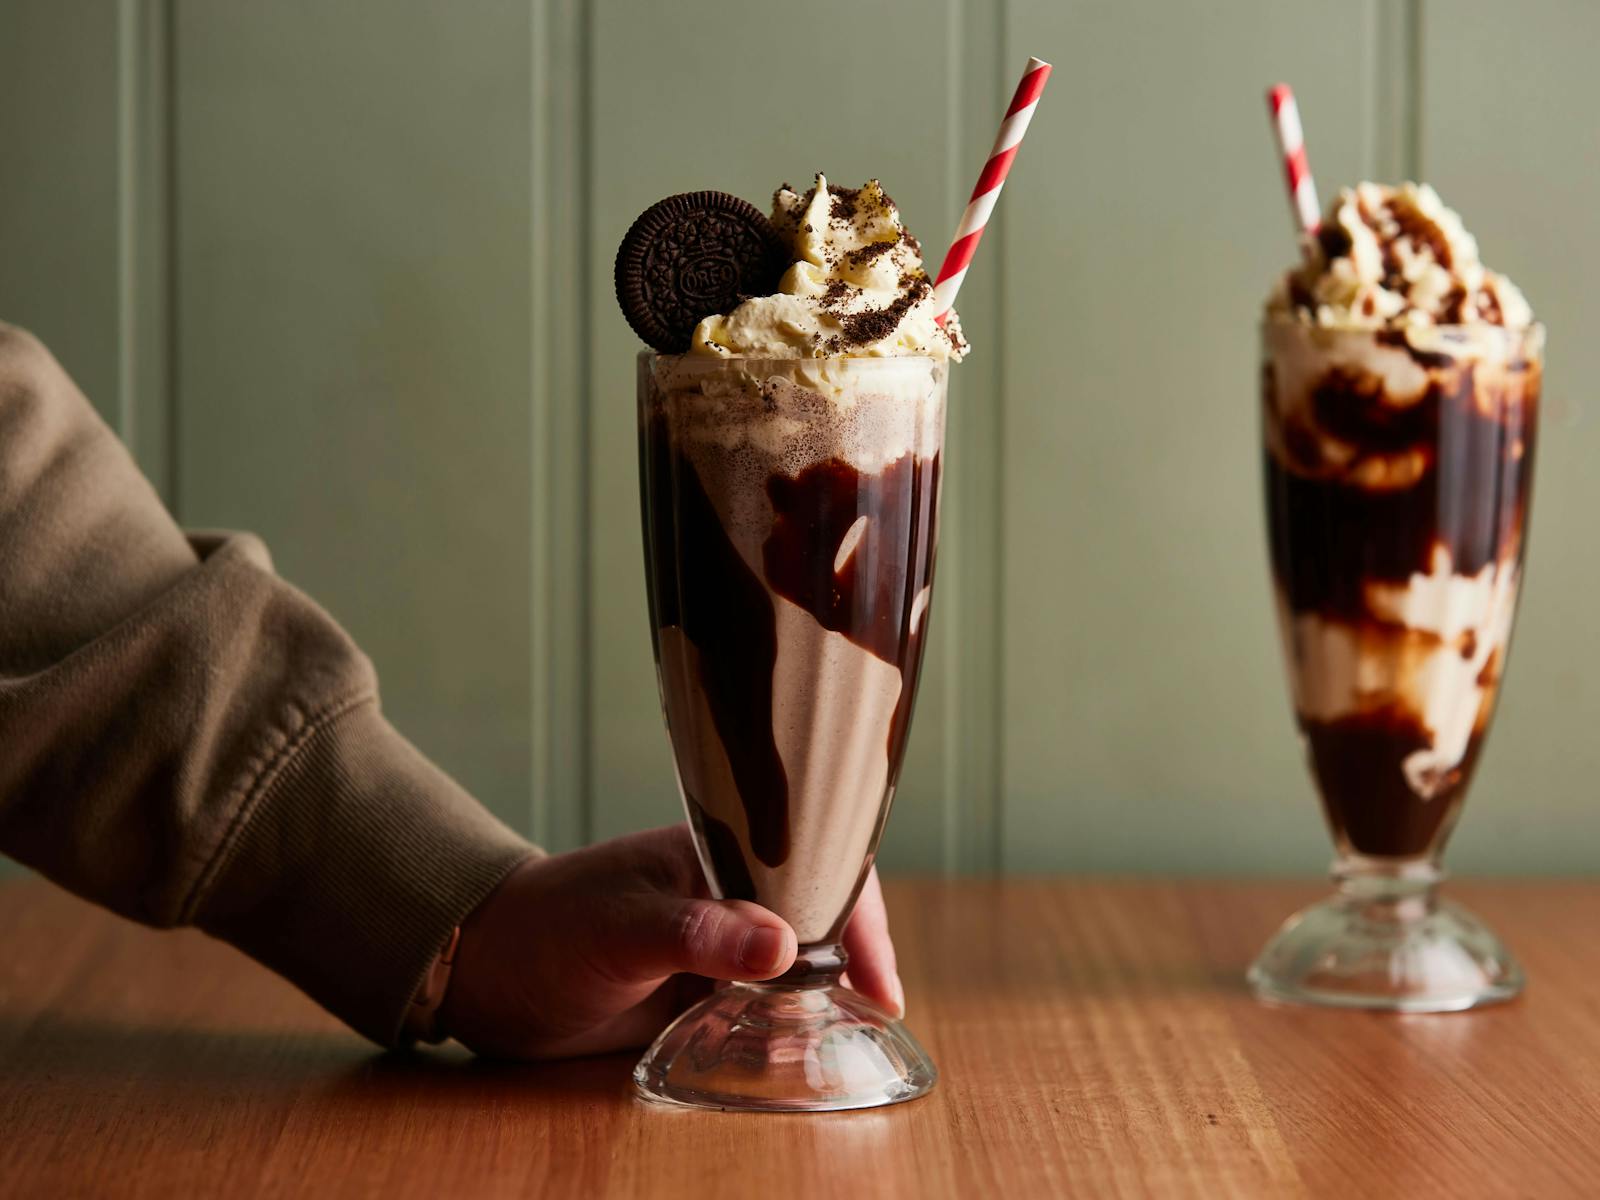 Two milkshakes with red and white striped paper straws sit in the foresground